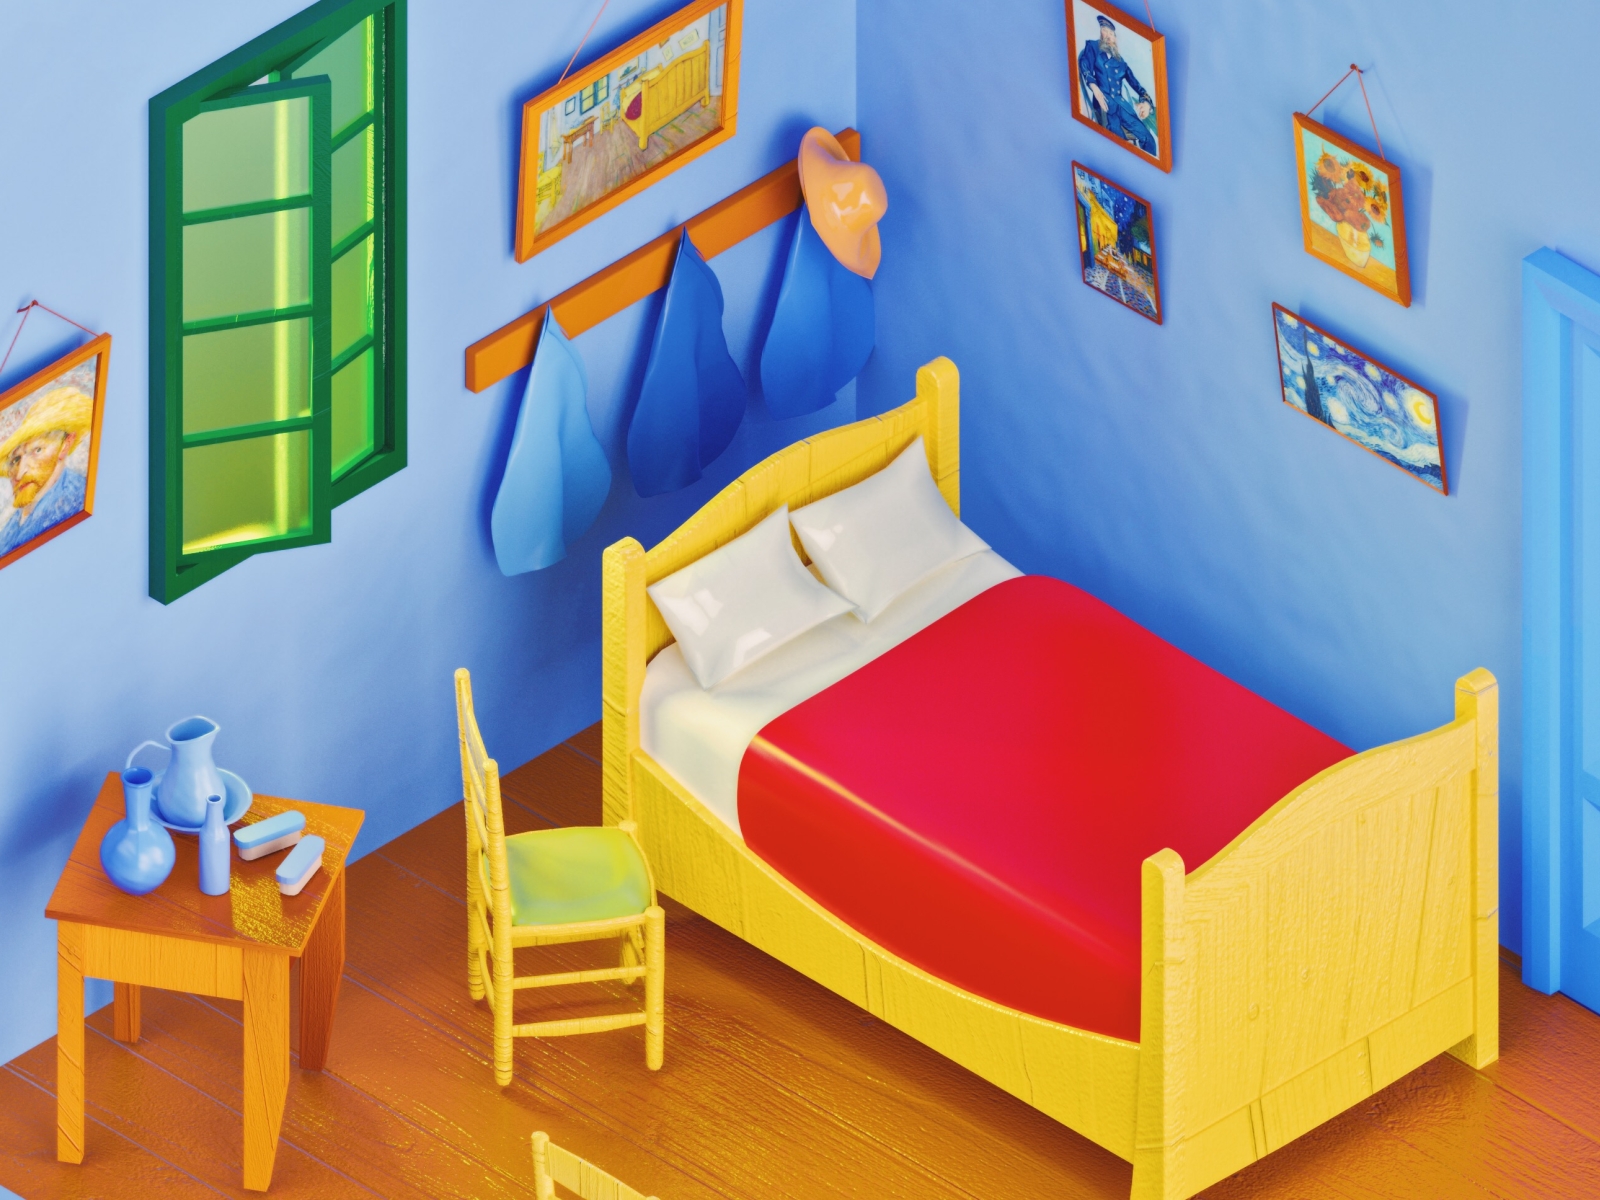 Vincent Van Gogh S Bedroom In Arles By Amrit Pal Singh On Dribbble,Kitchen Curtains For Small Windows